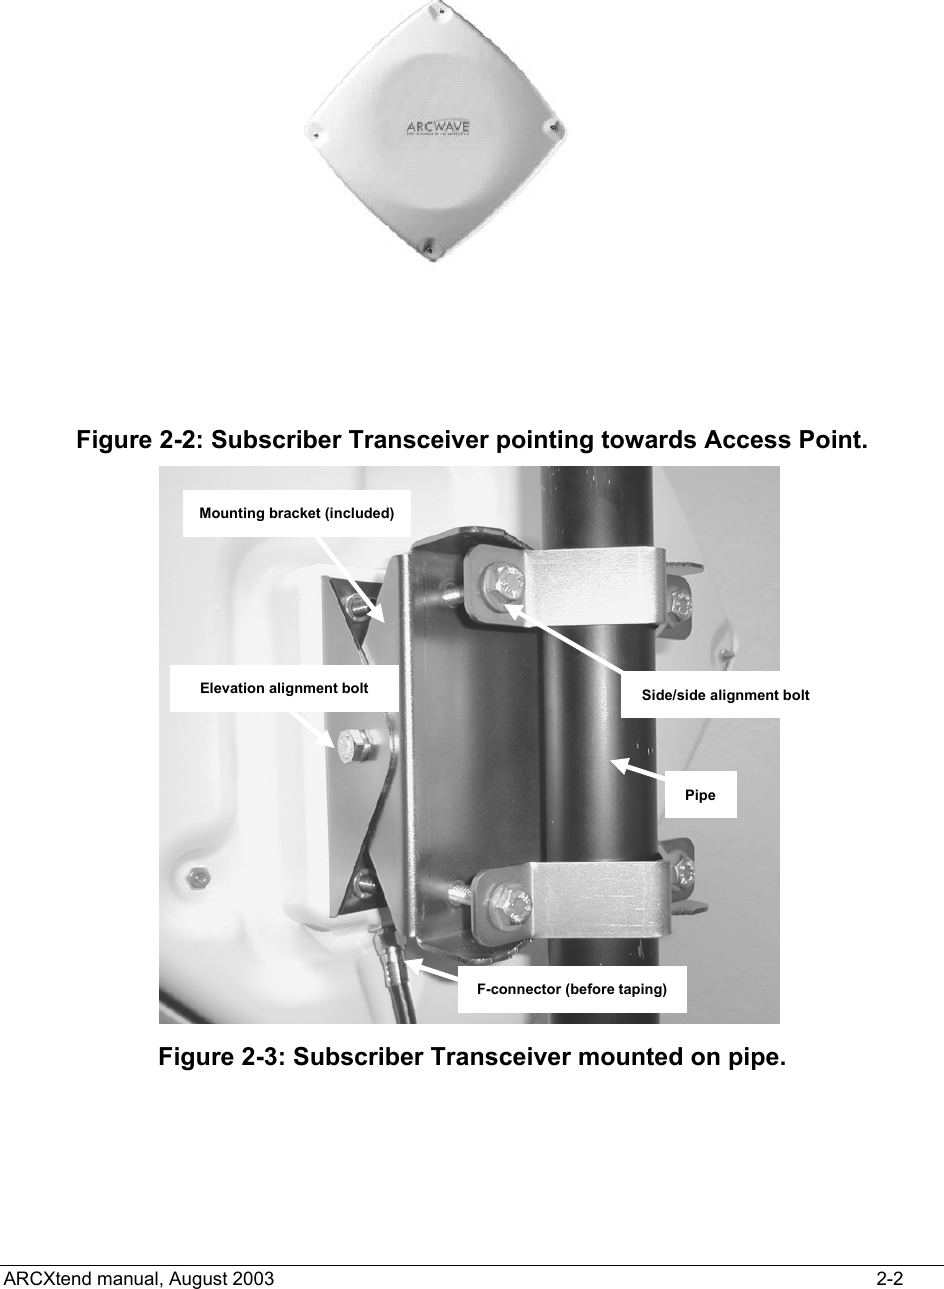   Figure 2-2: Subscriber Transceiver pointing towards Access Point. Mounting bracket (included)Elevation alignment boltF-connector (before taping)PipeSide/side alignment bolt Figure 2-3: Subscriber Transceiver mounted on pipe.   ARCXtend manual, August 2003    2-2 